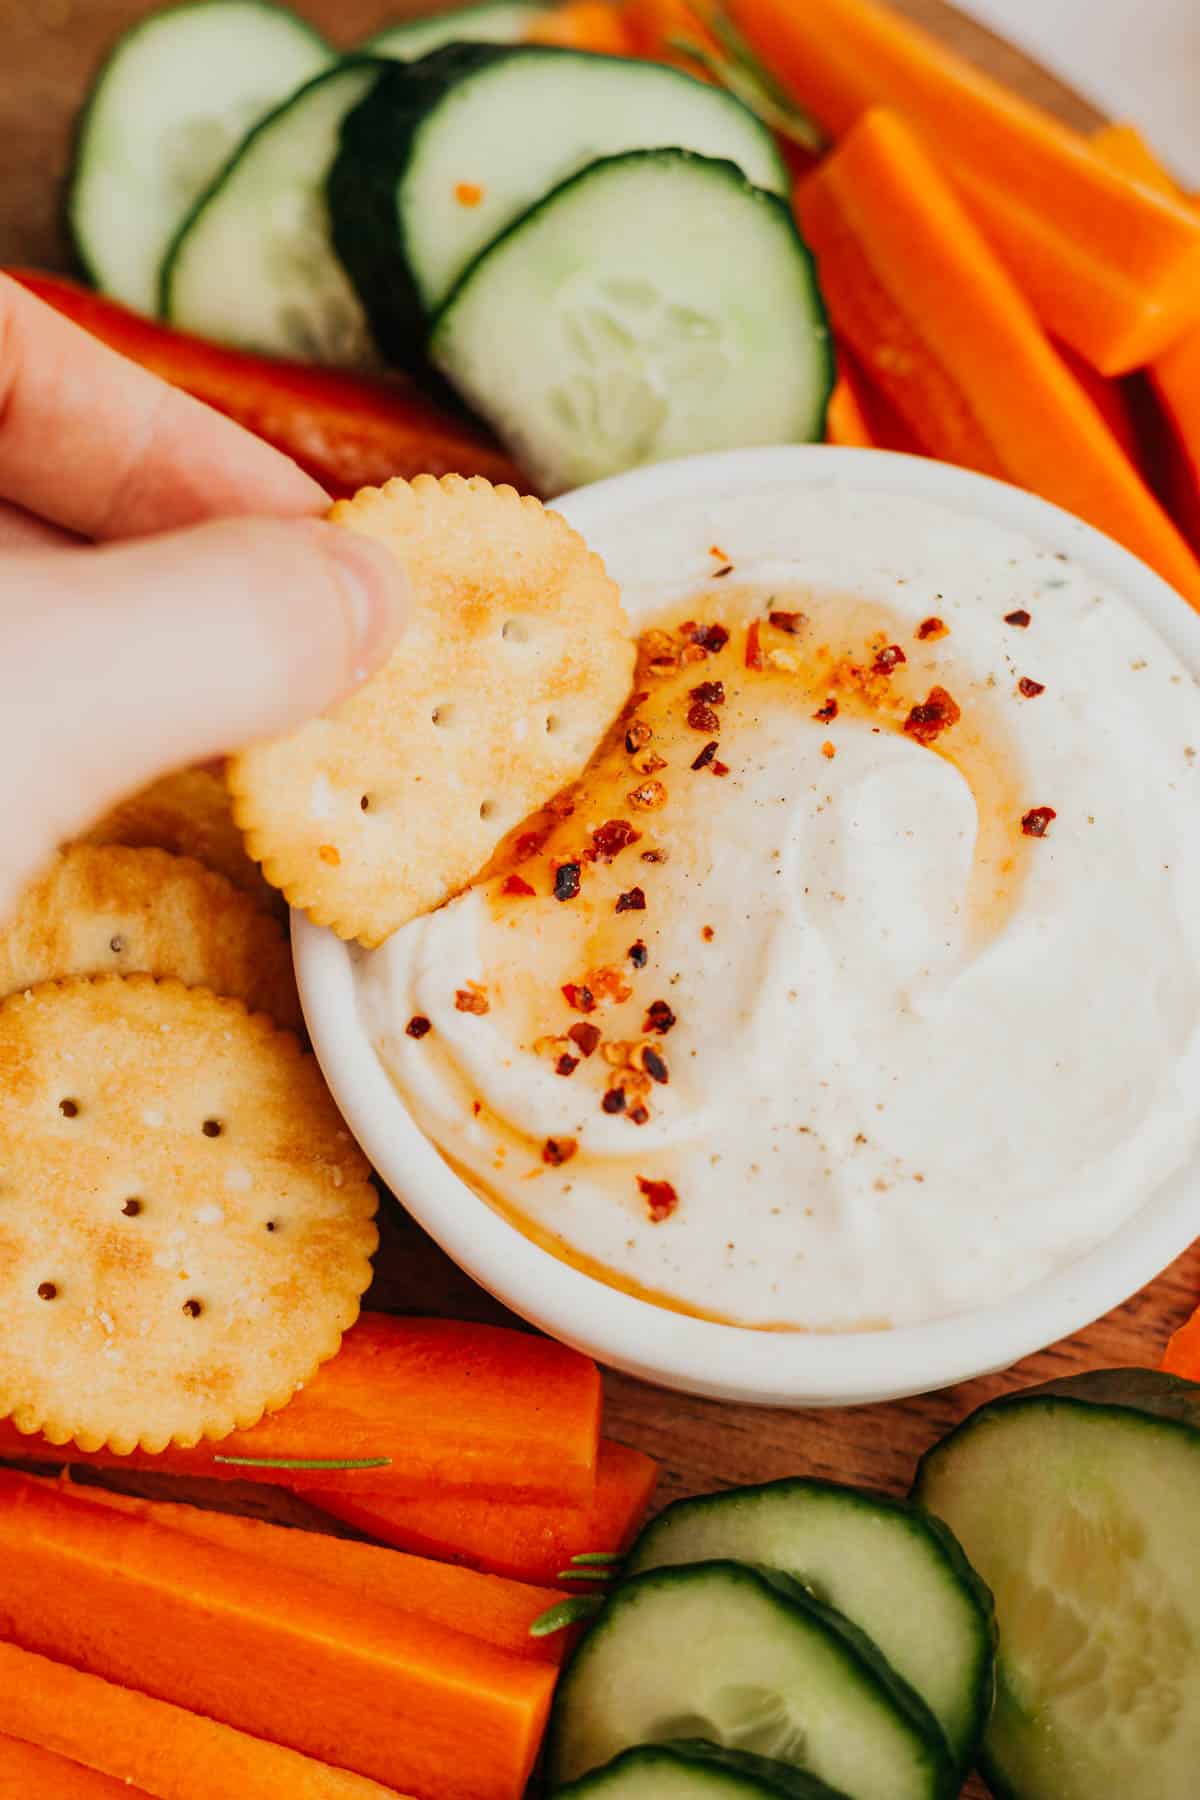 A hand holding a cracker, dipping into a whipped ricotta dip.